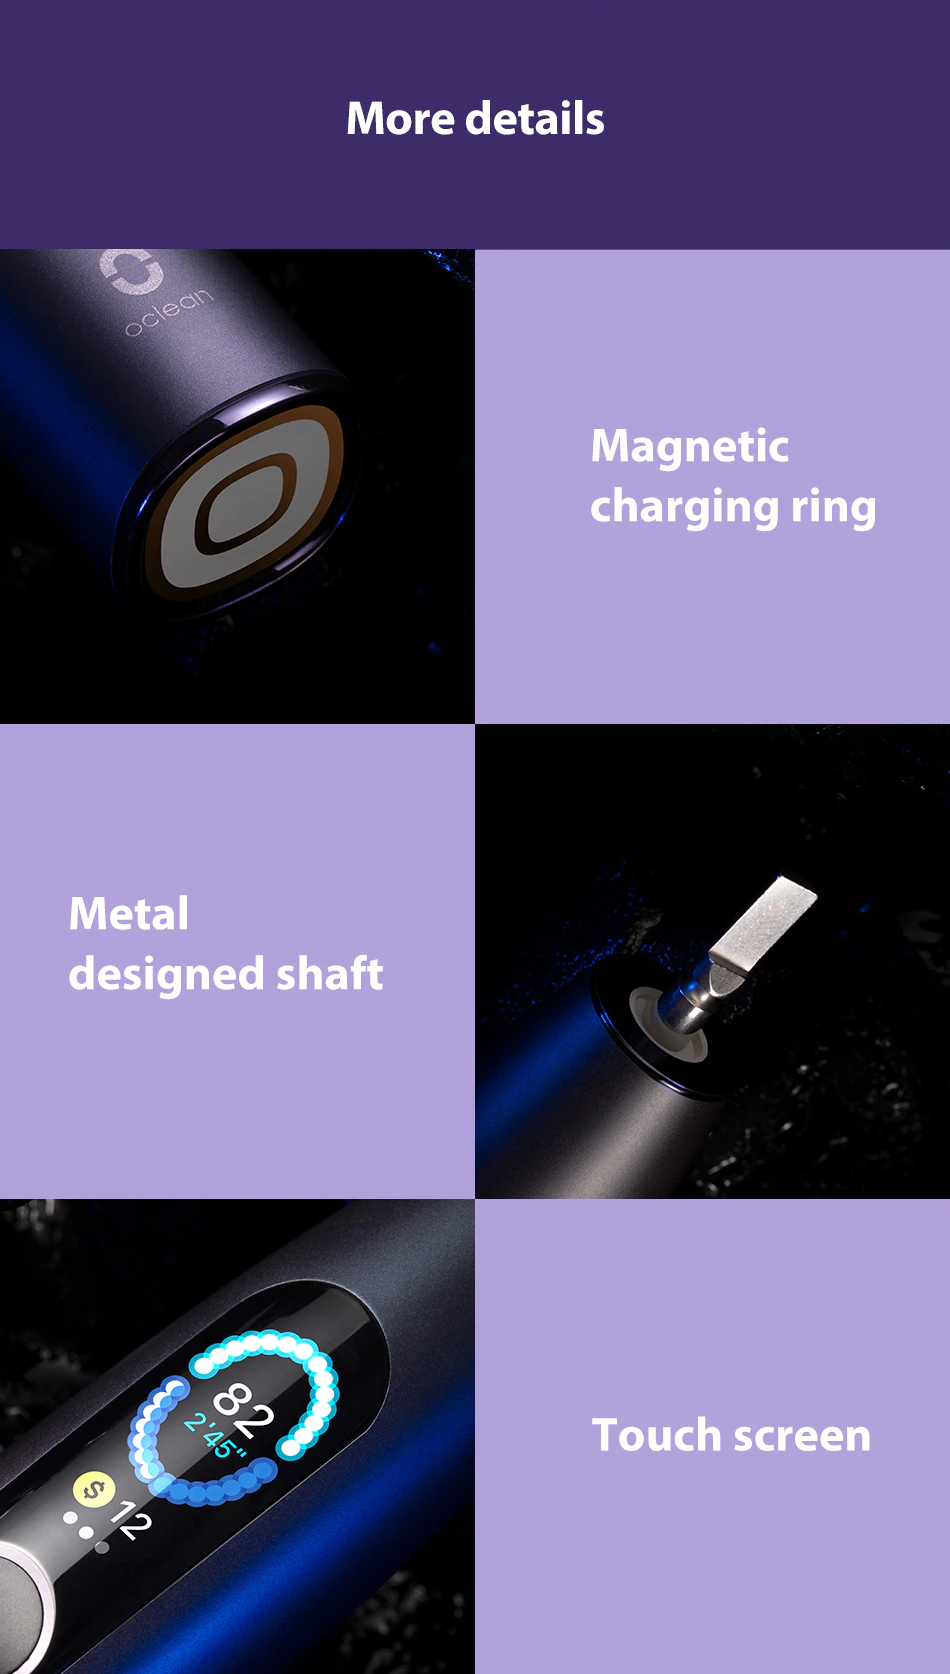 Magnetic charging ring metal designed shaft touch screen